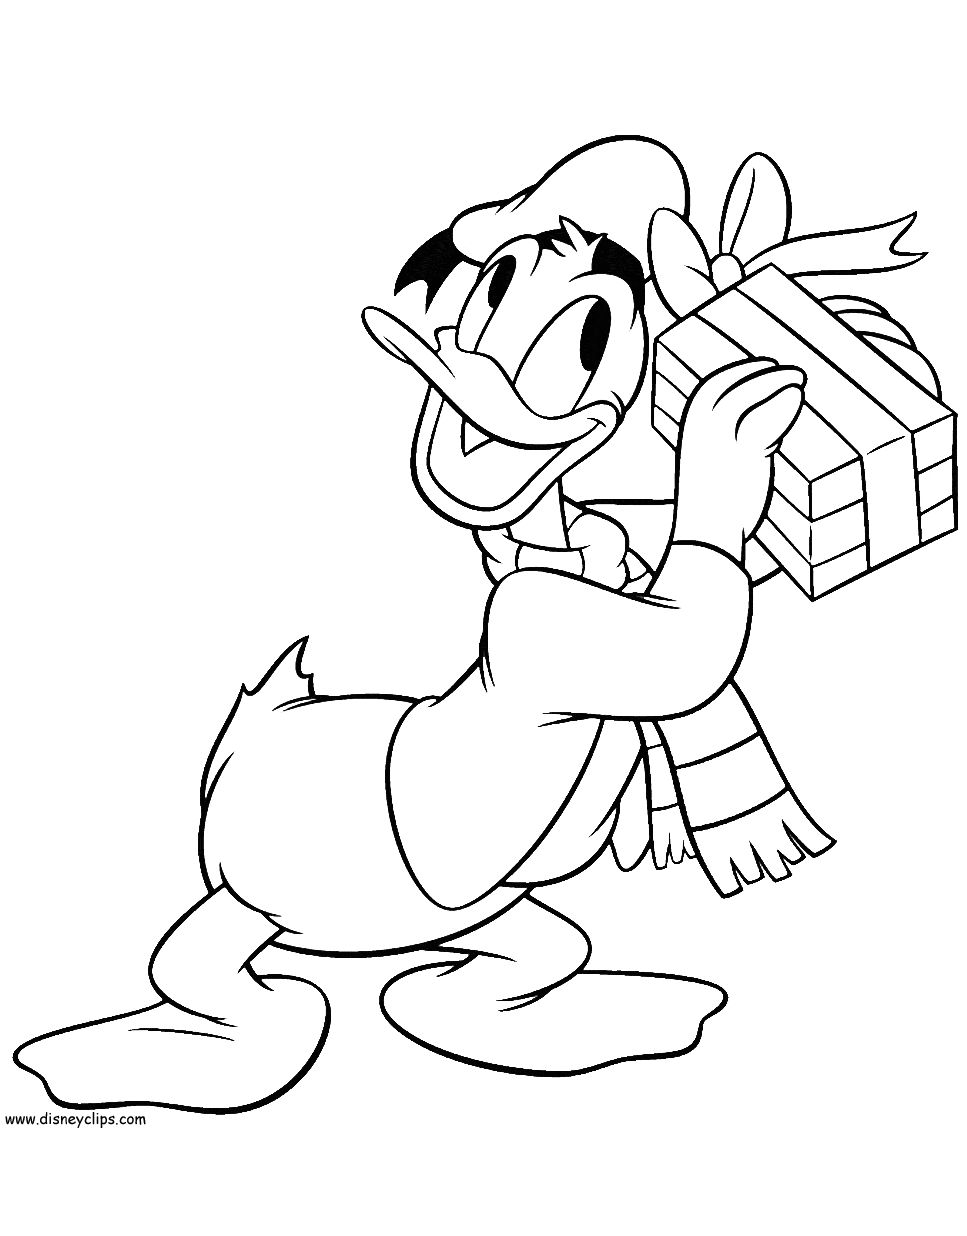 Download Disney Donald Duck Coloring Pages - Color and Drawing